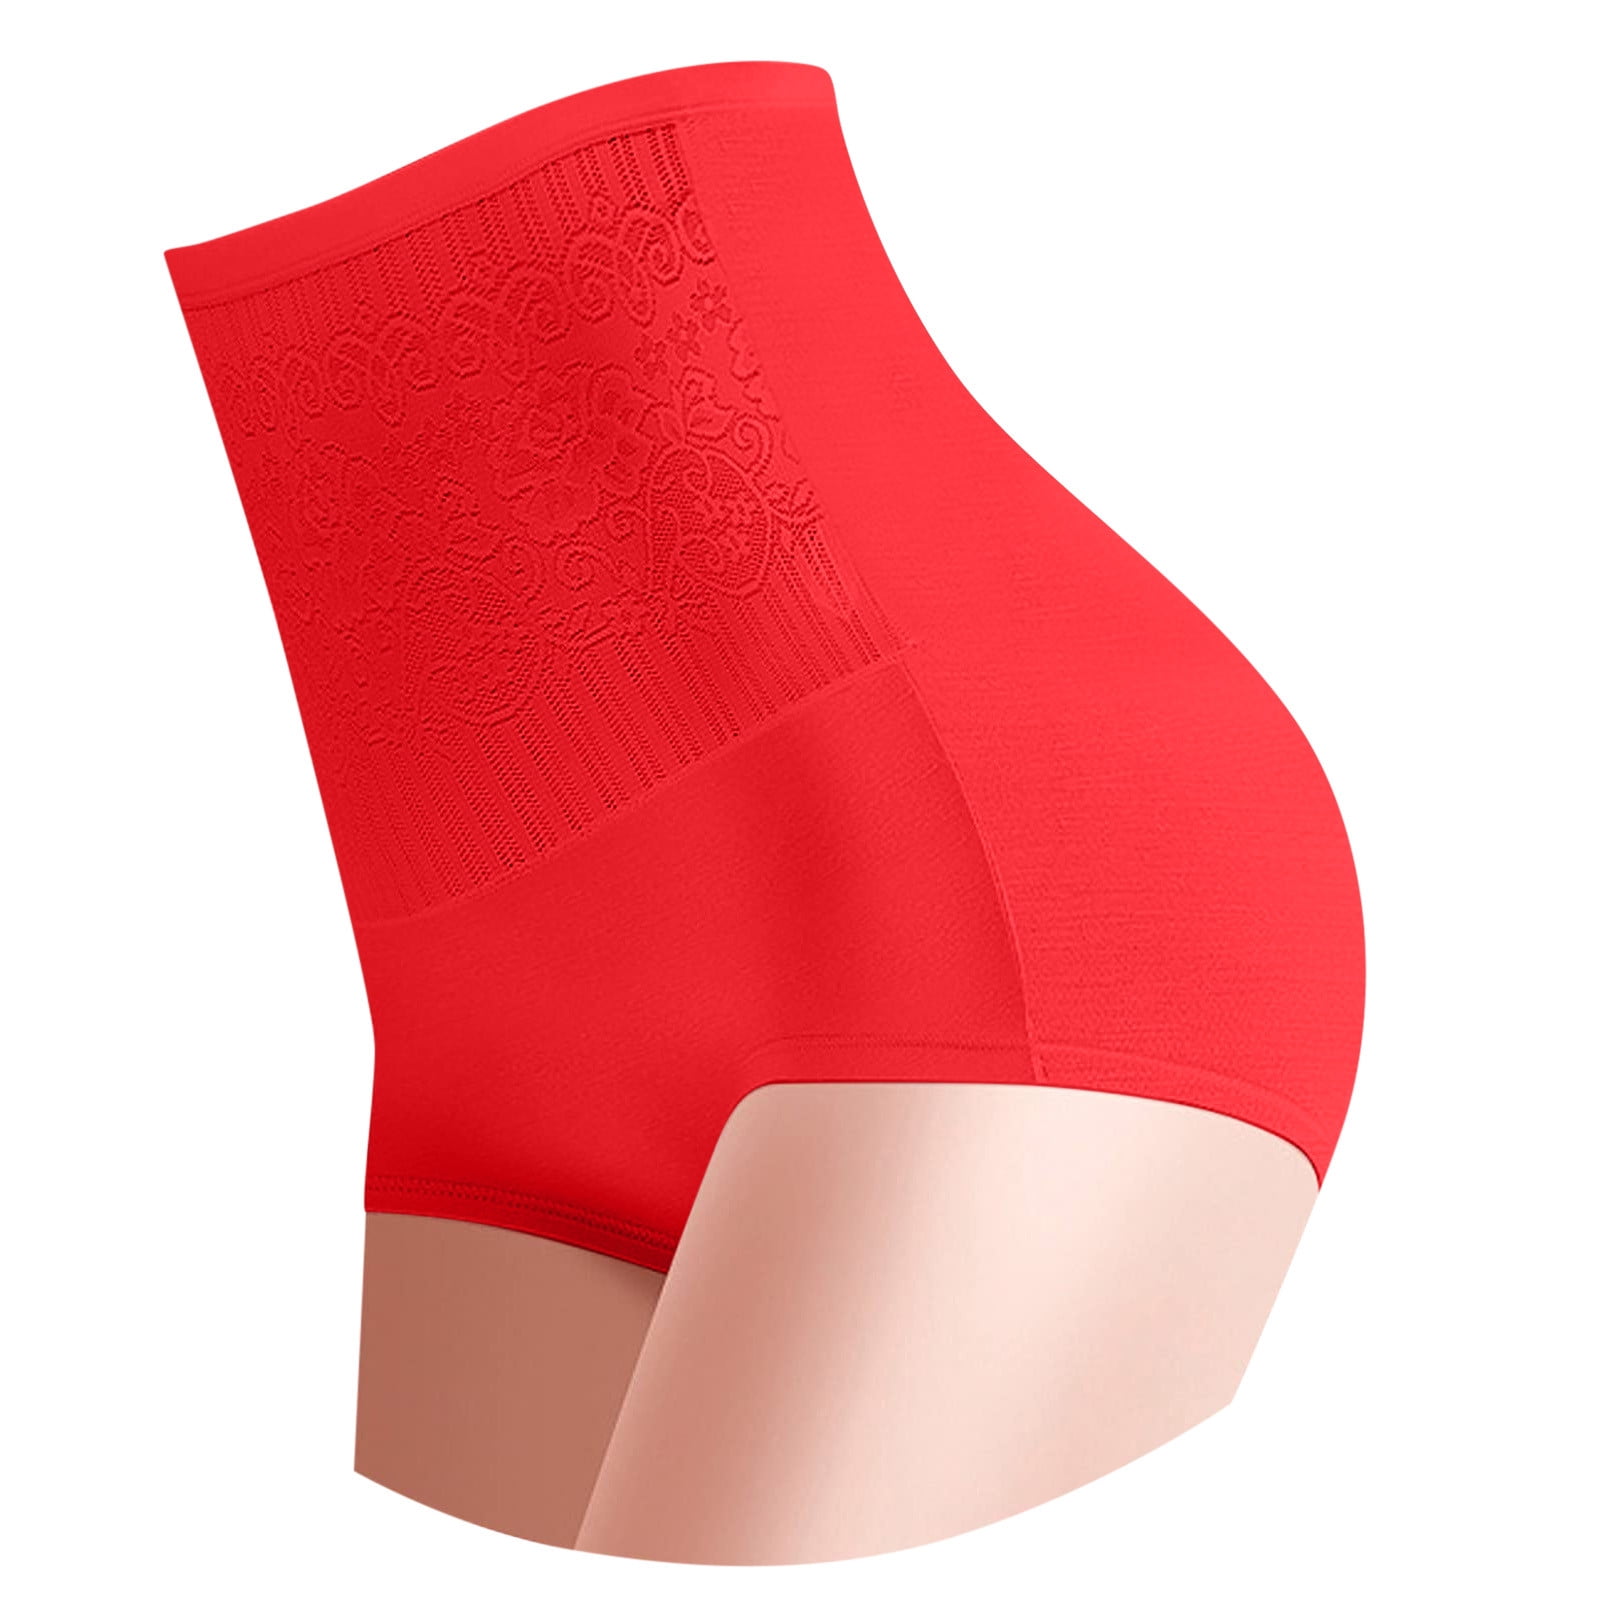 Women High Waist Body Shaping Panties Breathable Body Shaper Control Pants  Slimming Tummy Underwear Panty Shapers Pants 